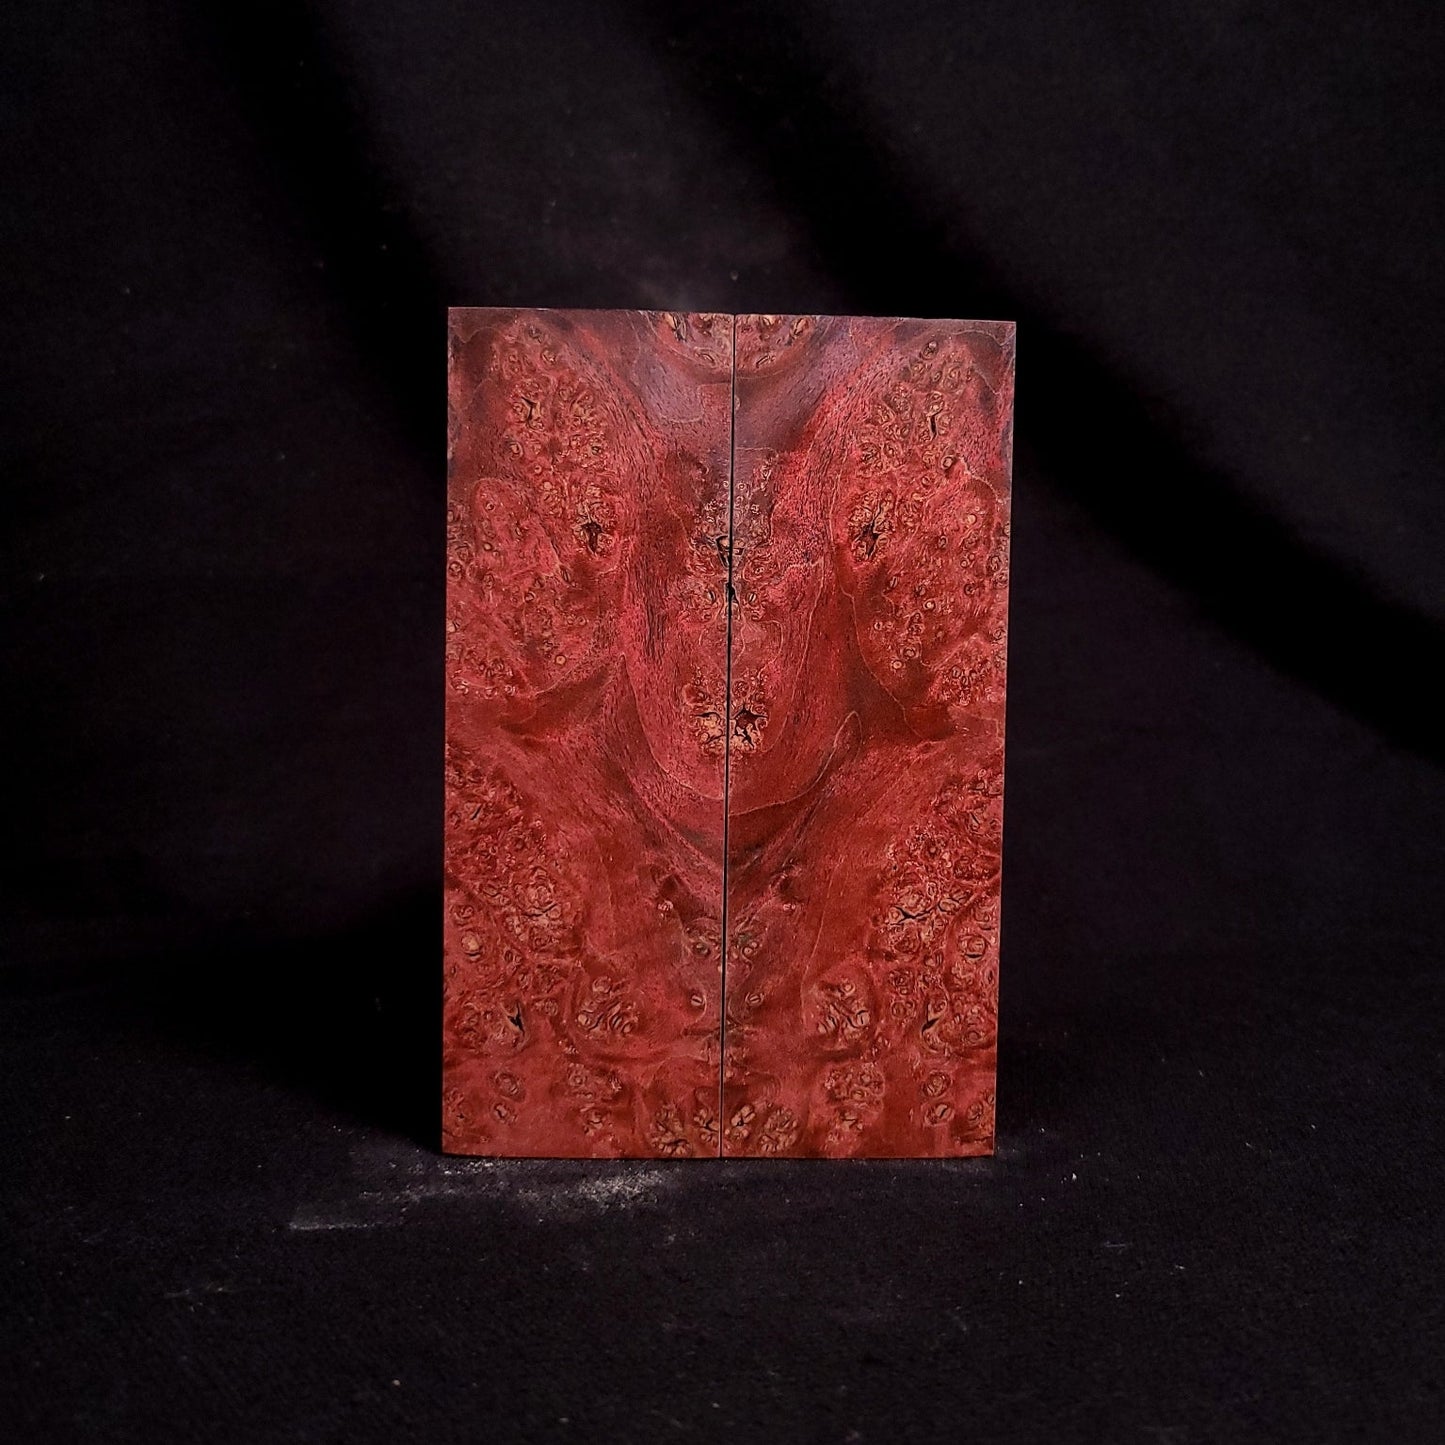 #2024 - RedRum Maple Burl with a tough of SINISTER - Doube Dyed Maple Burl - RockSolid Scales -